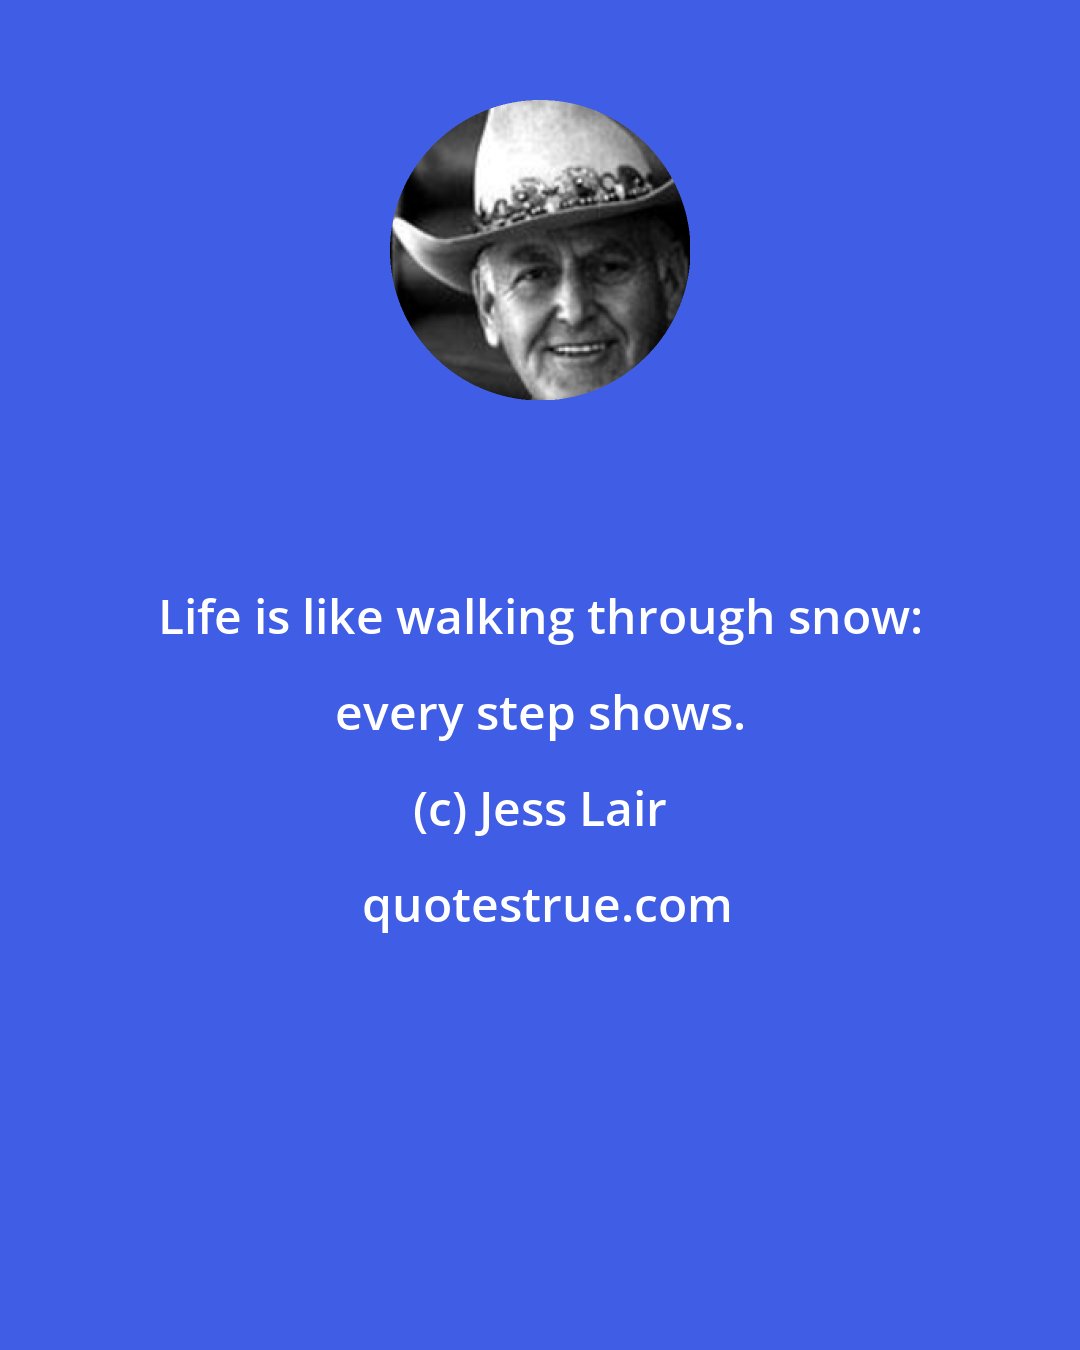 Jess Lair: Life is like walking through snow: every step shows.